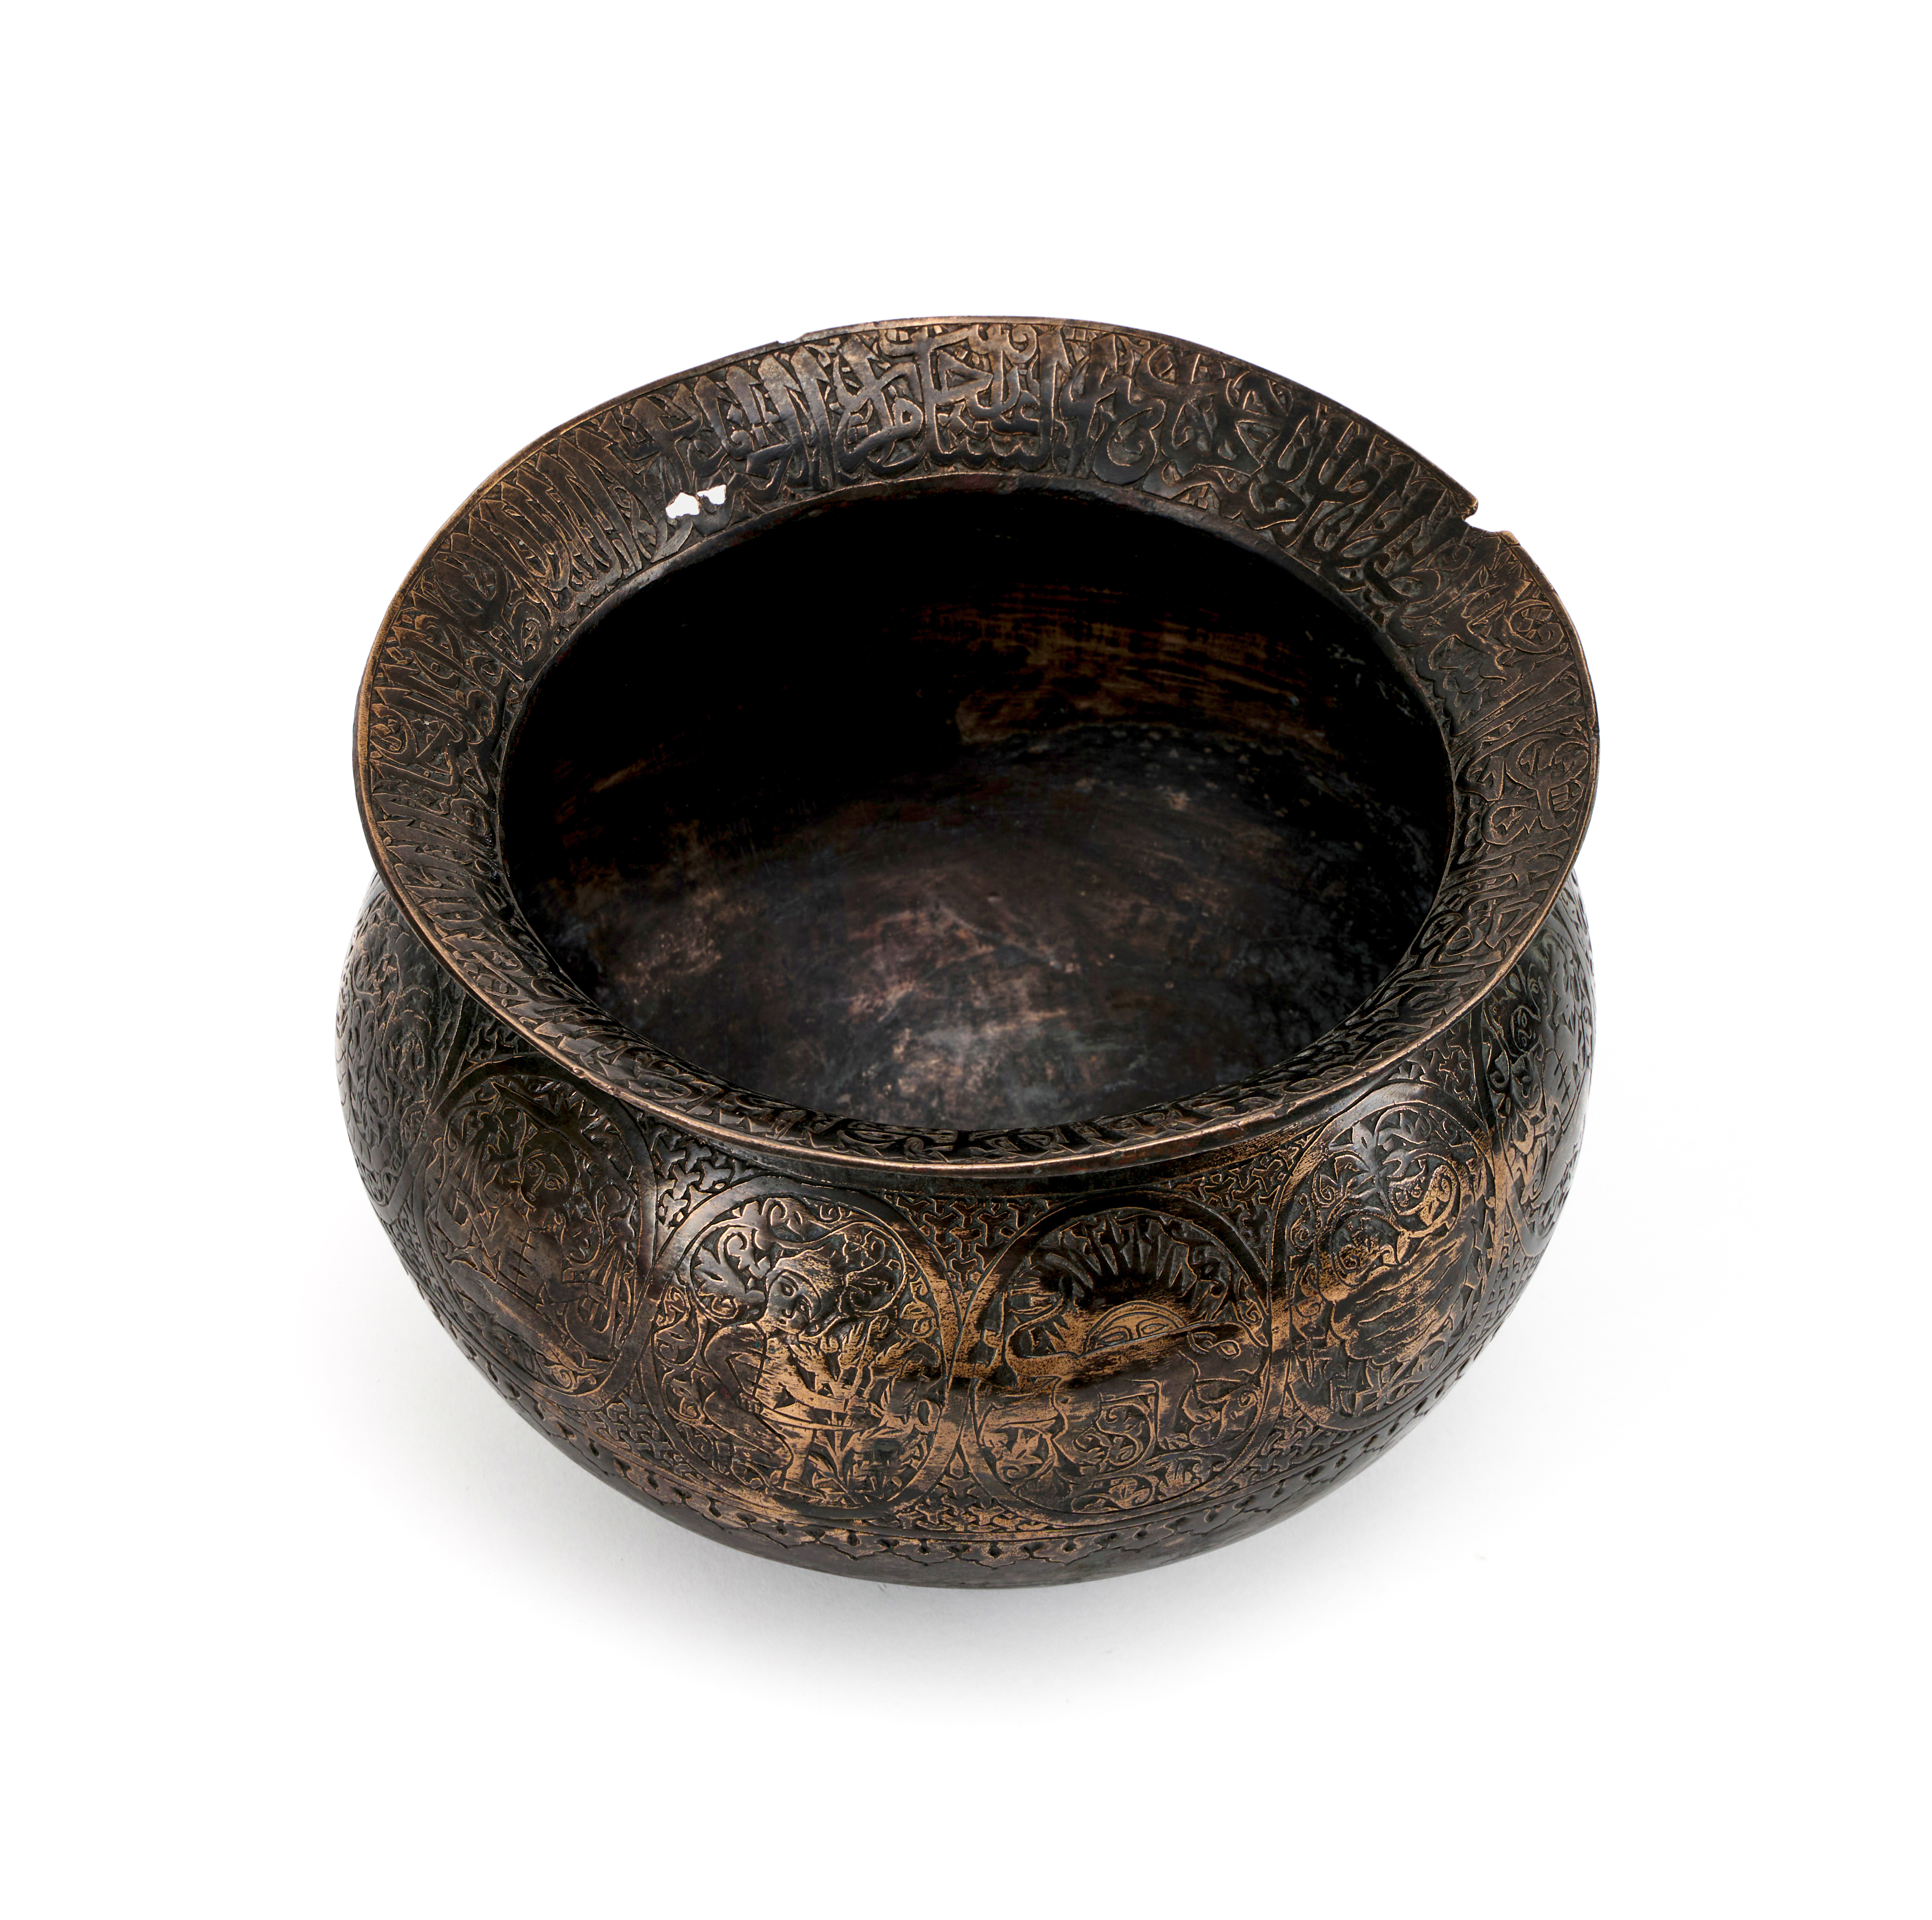 A TINNED COPPER CALLIGRAPHIC AND ZODIAC BASIN, ZAND DYNASTY, 18TH CENTURY - Image 5 of 7